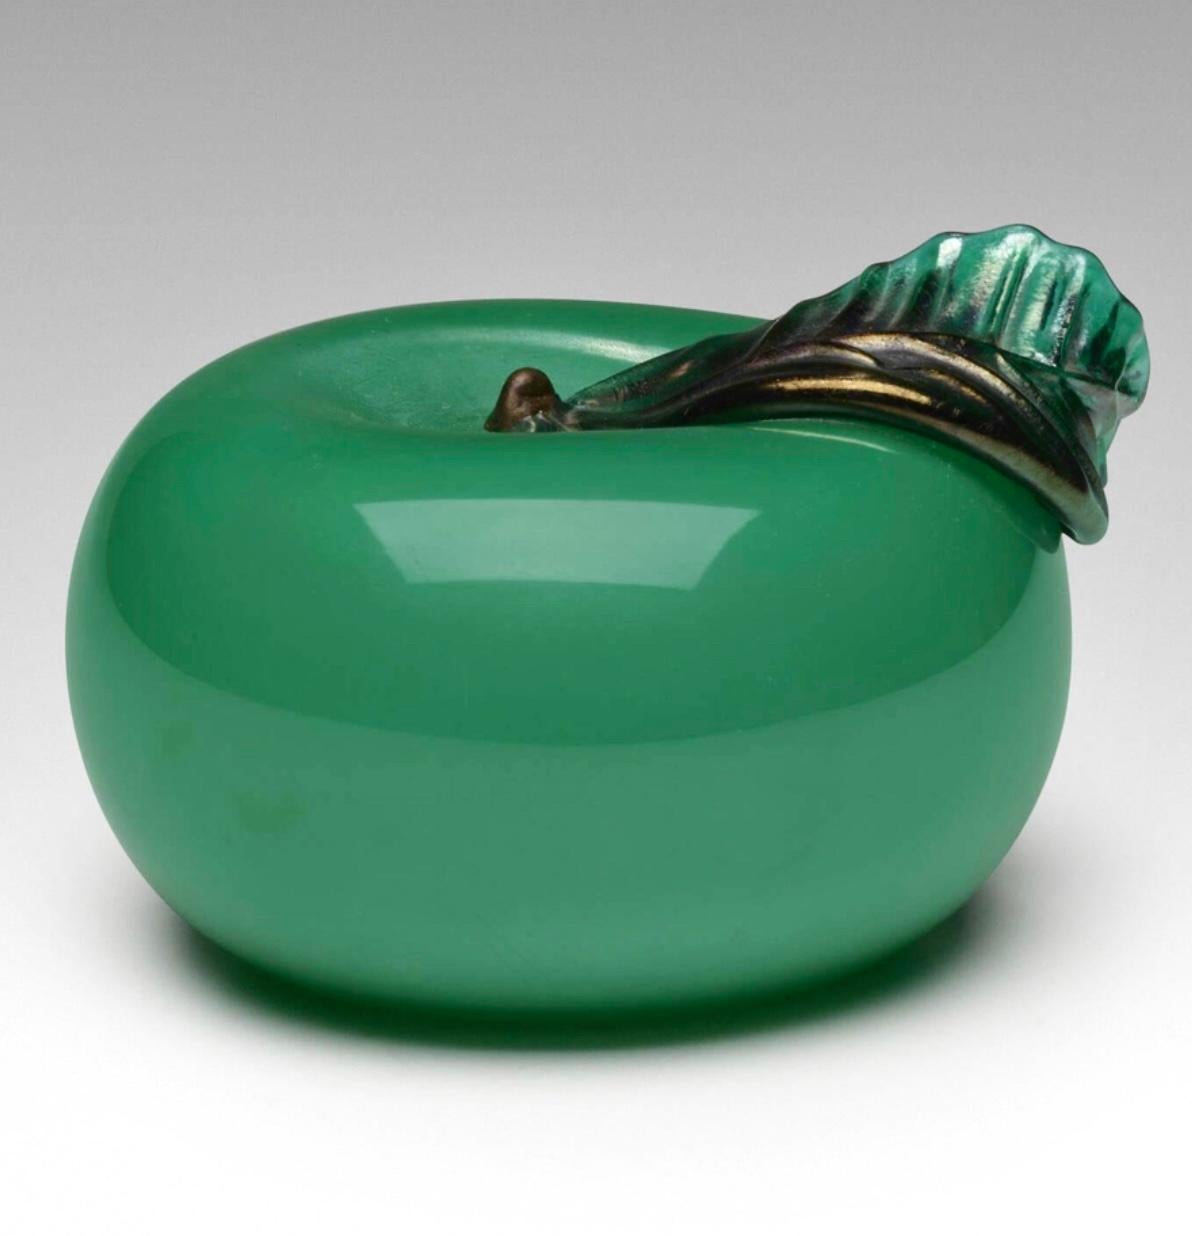 Napoleone Martinuzzi for Venini Murano Art Glass Green Apple Sculpture, Italy, c. 1926. acid-etched signature;  Murano green cased glass with applied gold leaf.
2.75 h x 4 w x 4.5 d in (7 x 10 x 11 cm). Signed with three-line acid stamp to underside